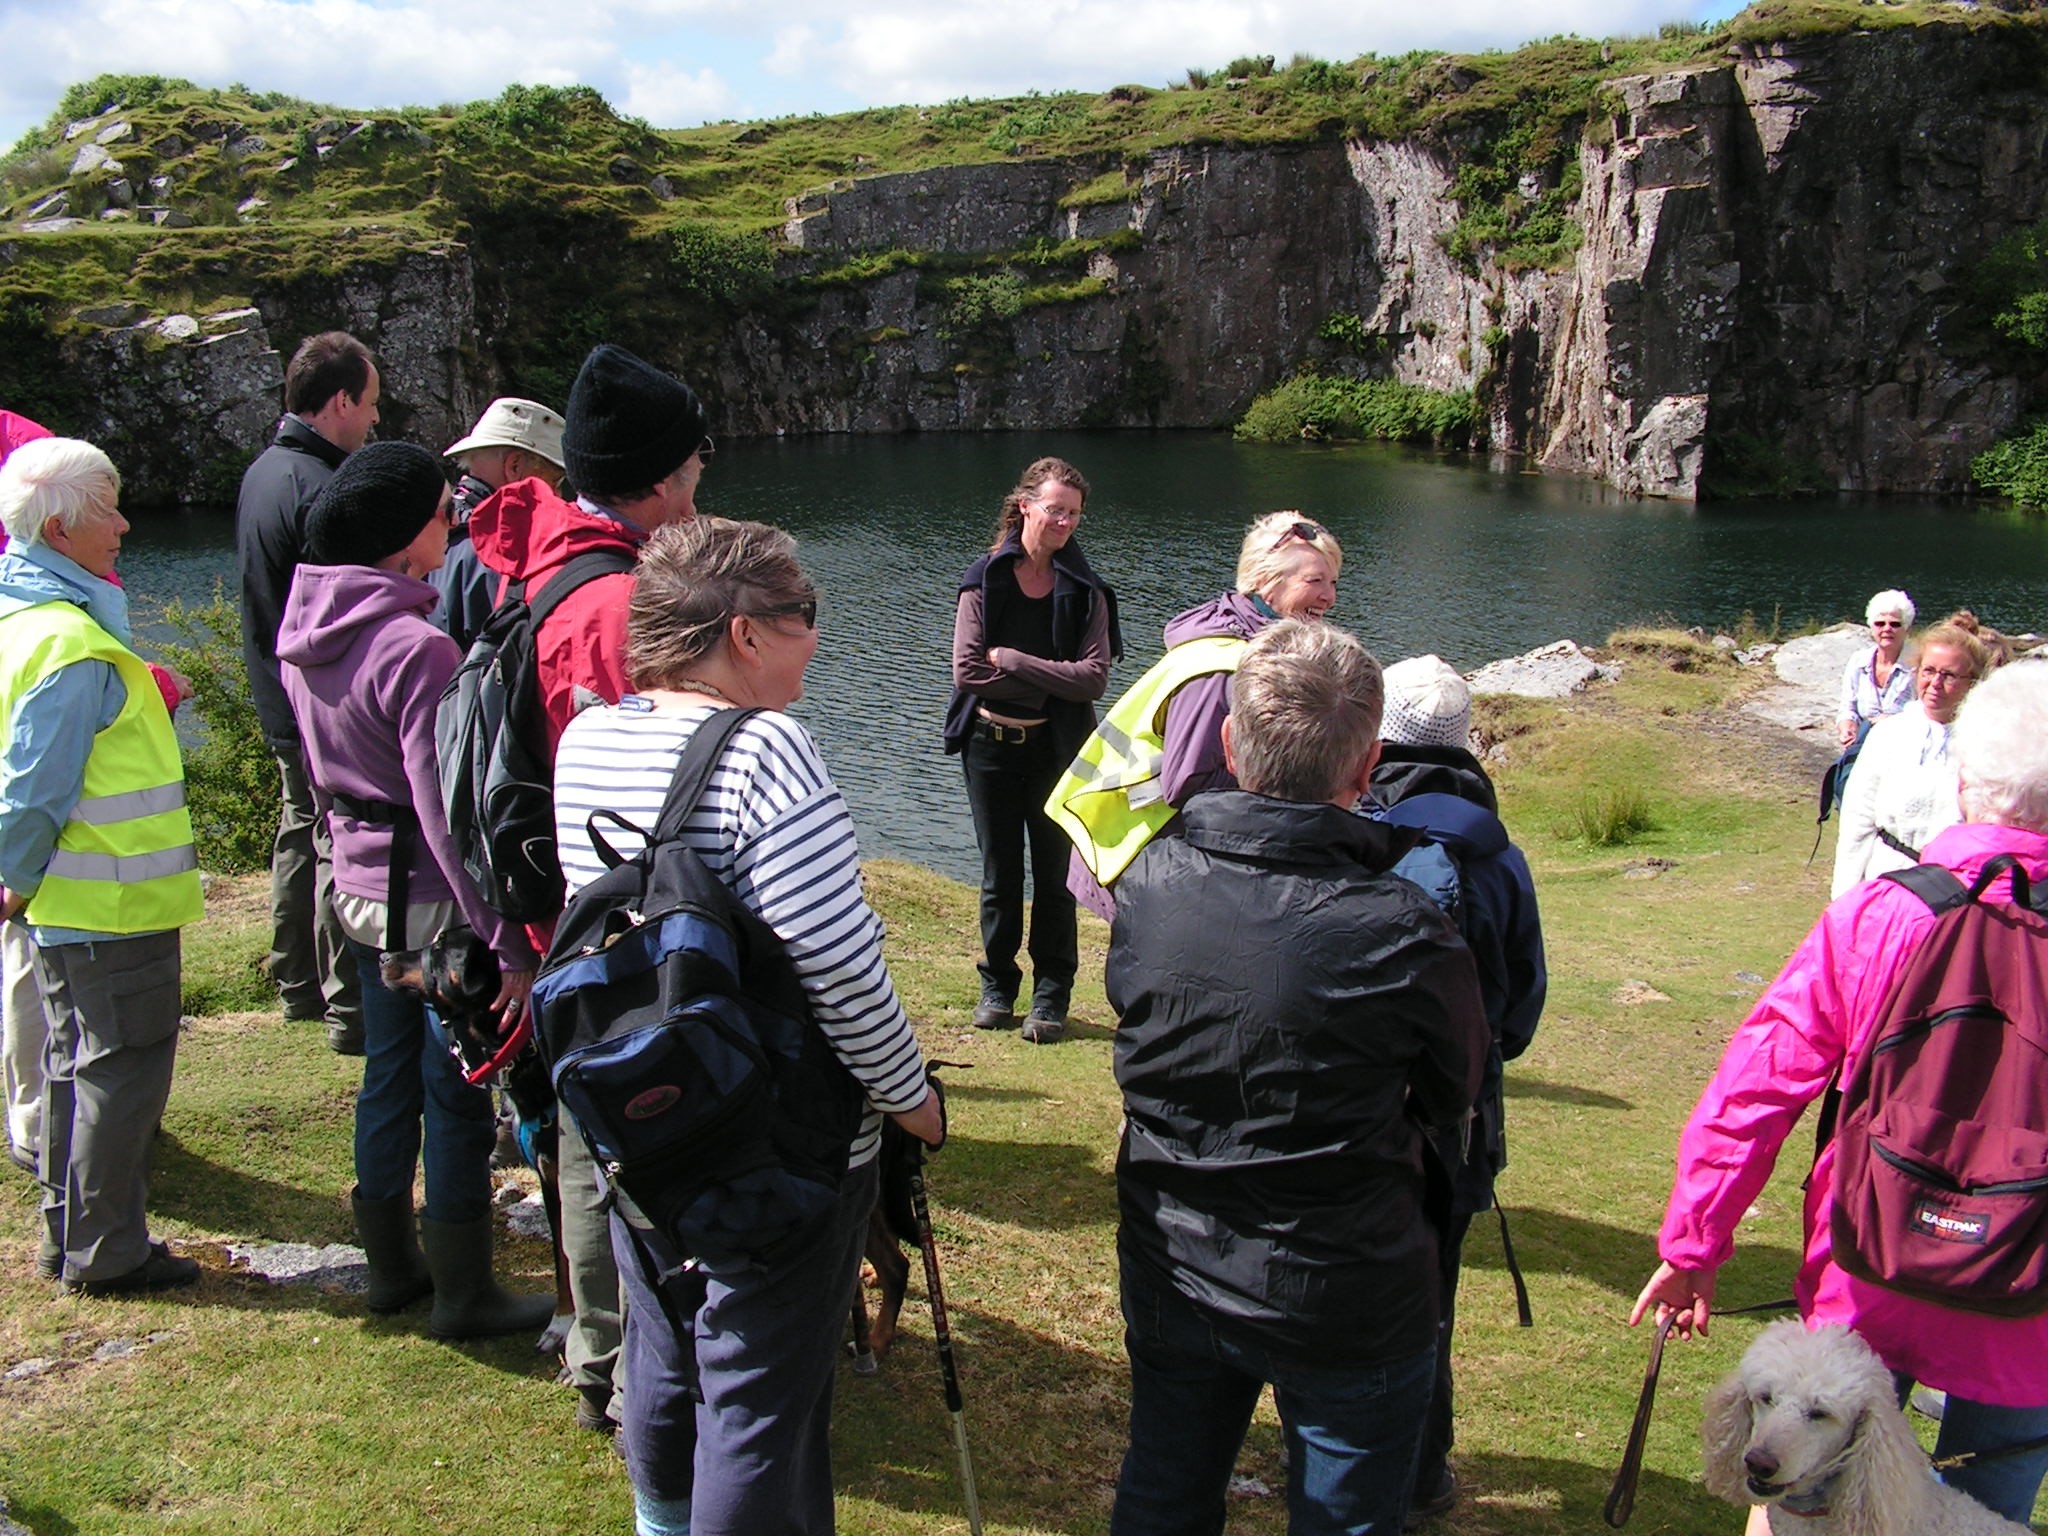 Goldiggins Quarry Routes for Walking and Hiking